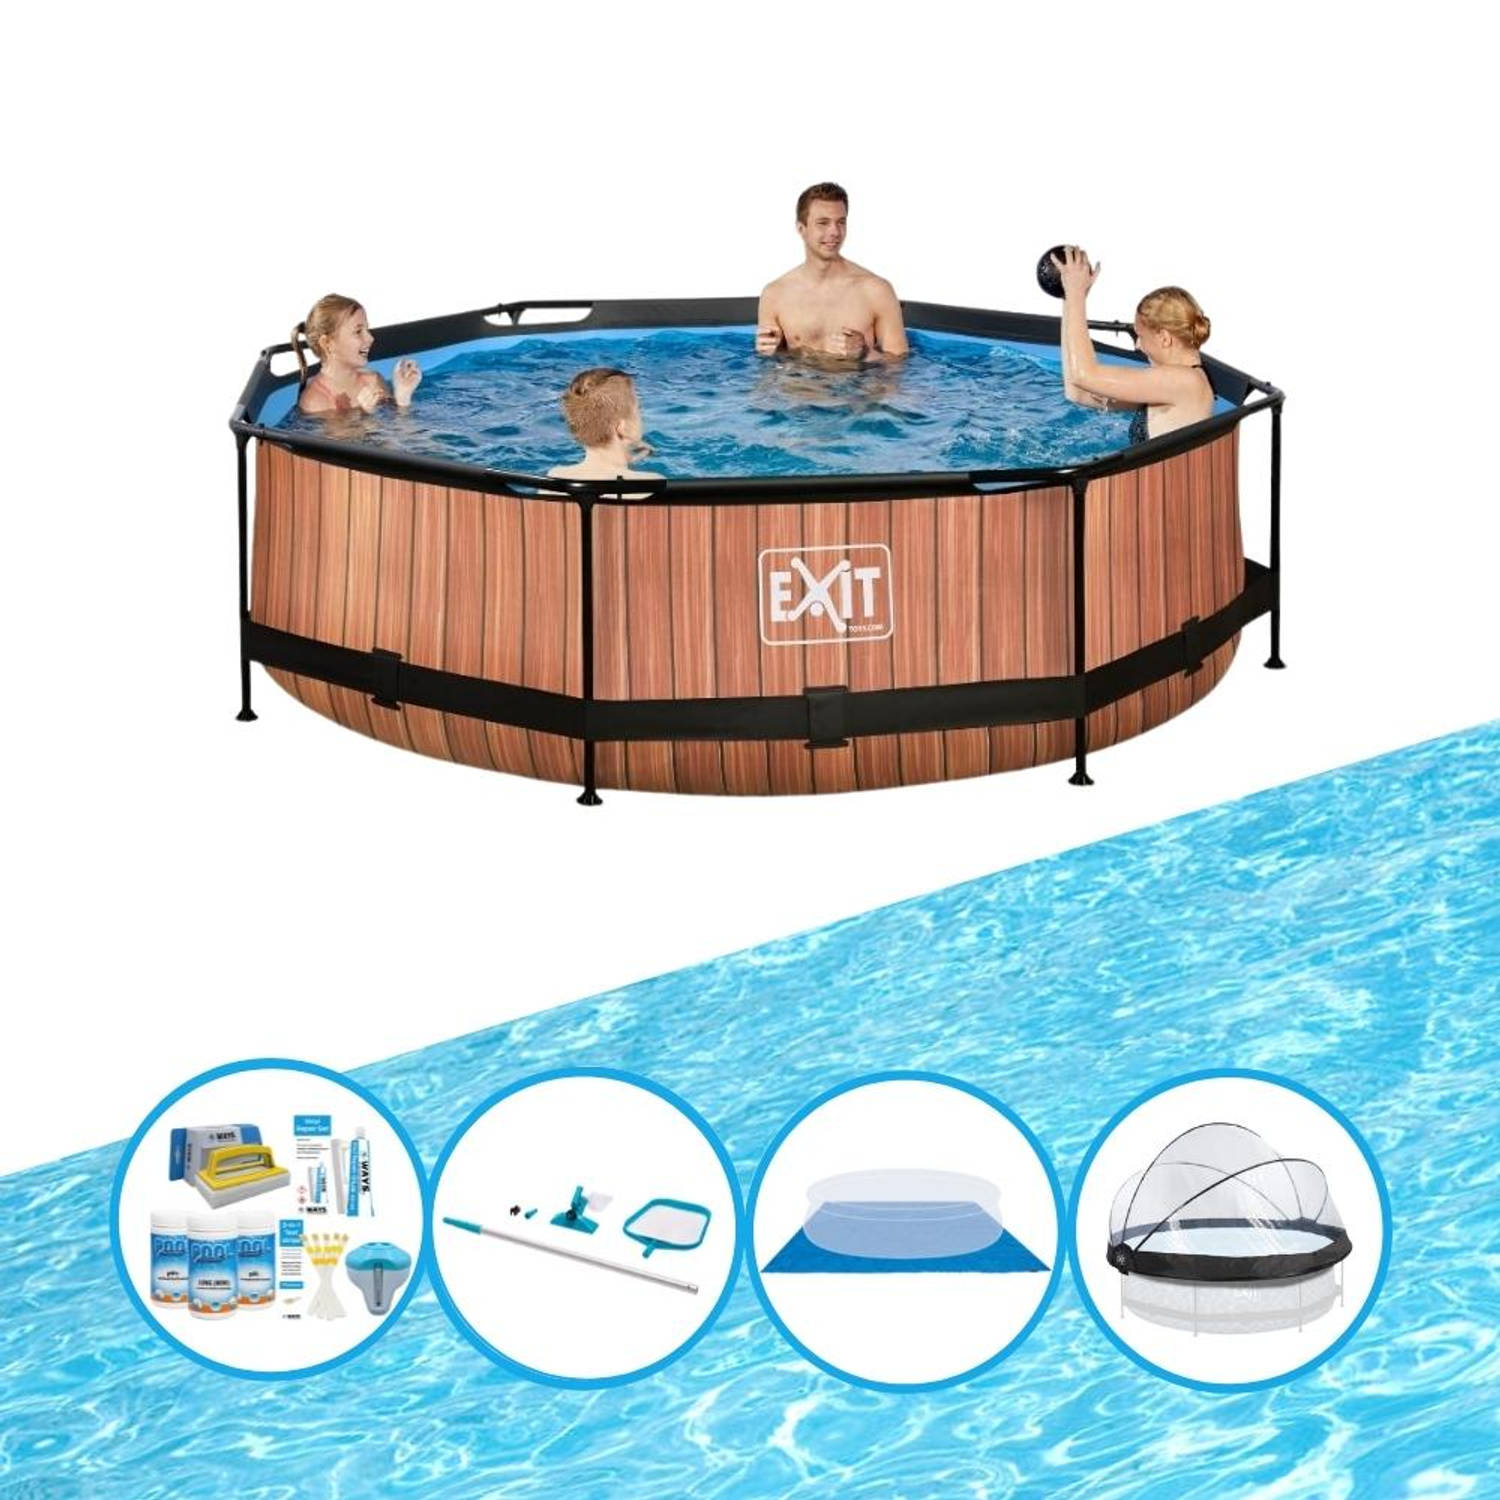 EXIT Toys Exit Zwembad Timber Style - ø300x76 Cm - Frame Pool - Zwembadpakket - Bruin